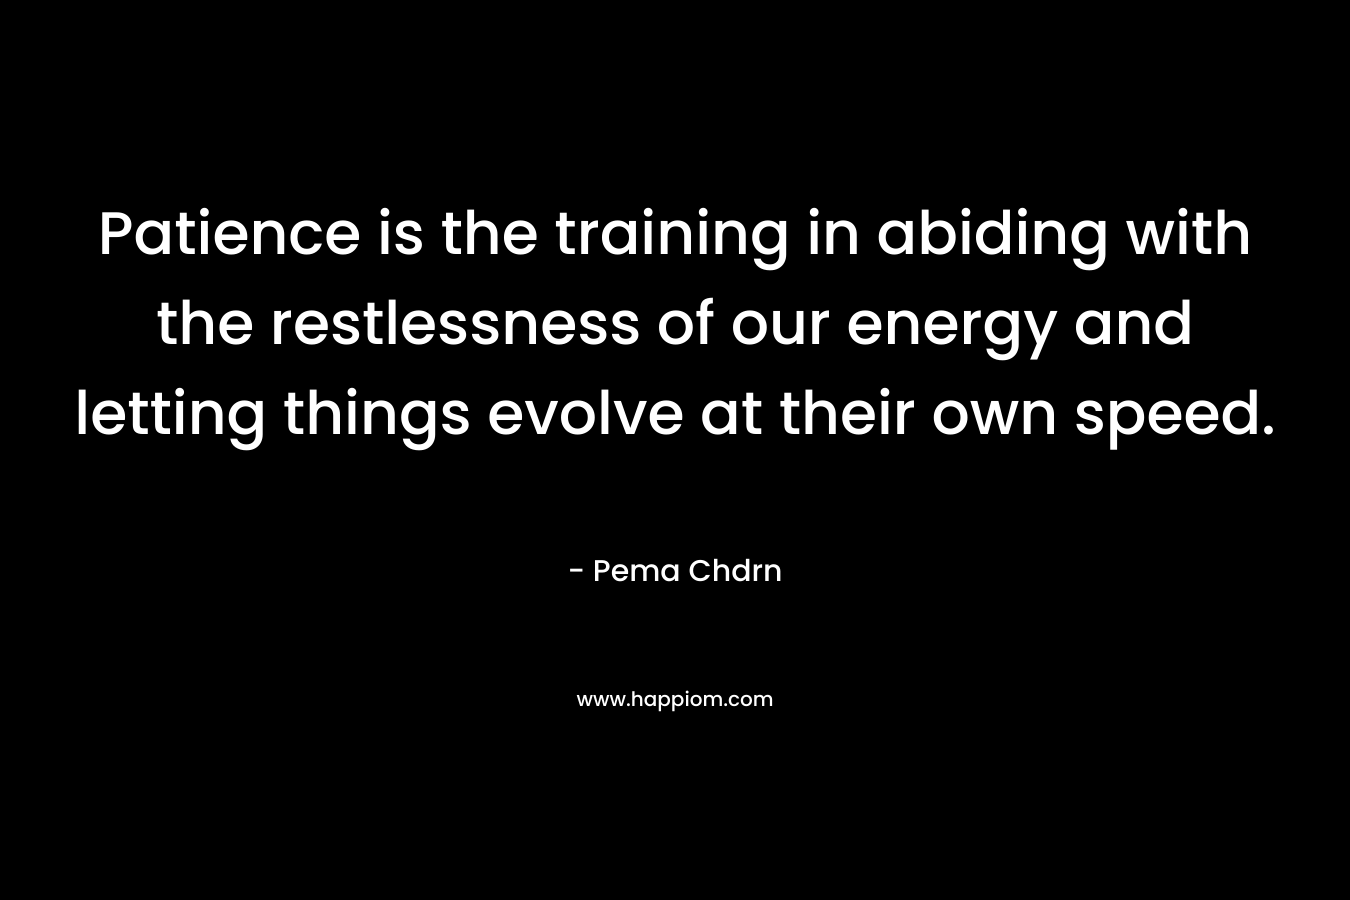 Patience is the training in abiding with the restlessness of our energy and letting things evolve at their own speed. – Pema Chdrn